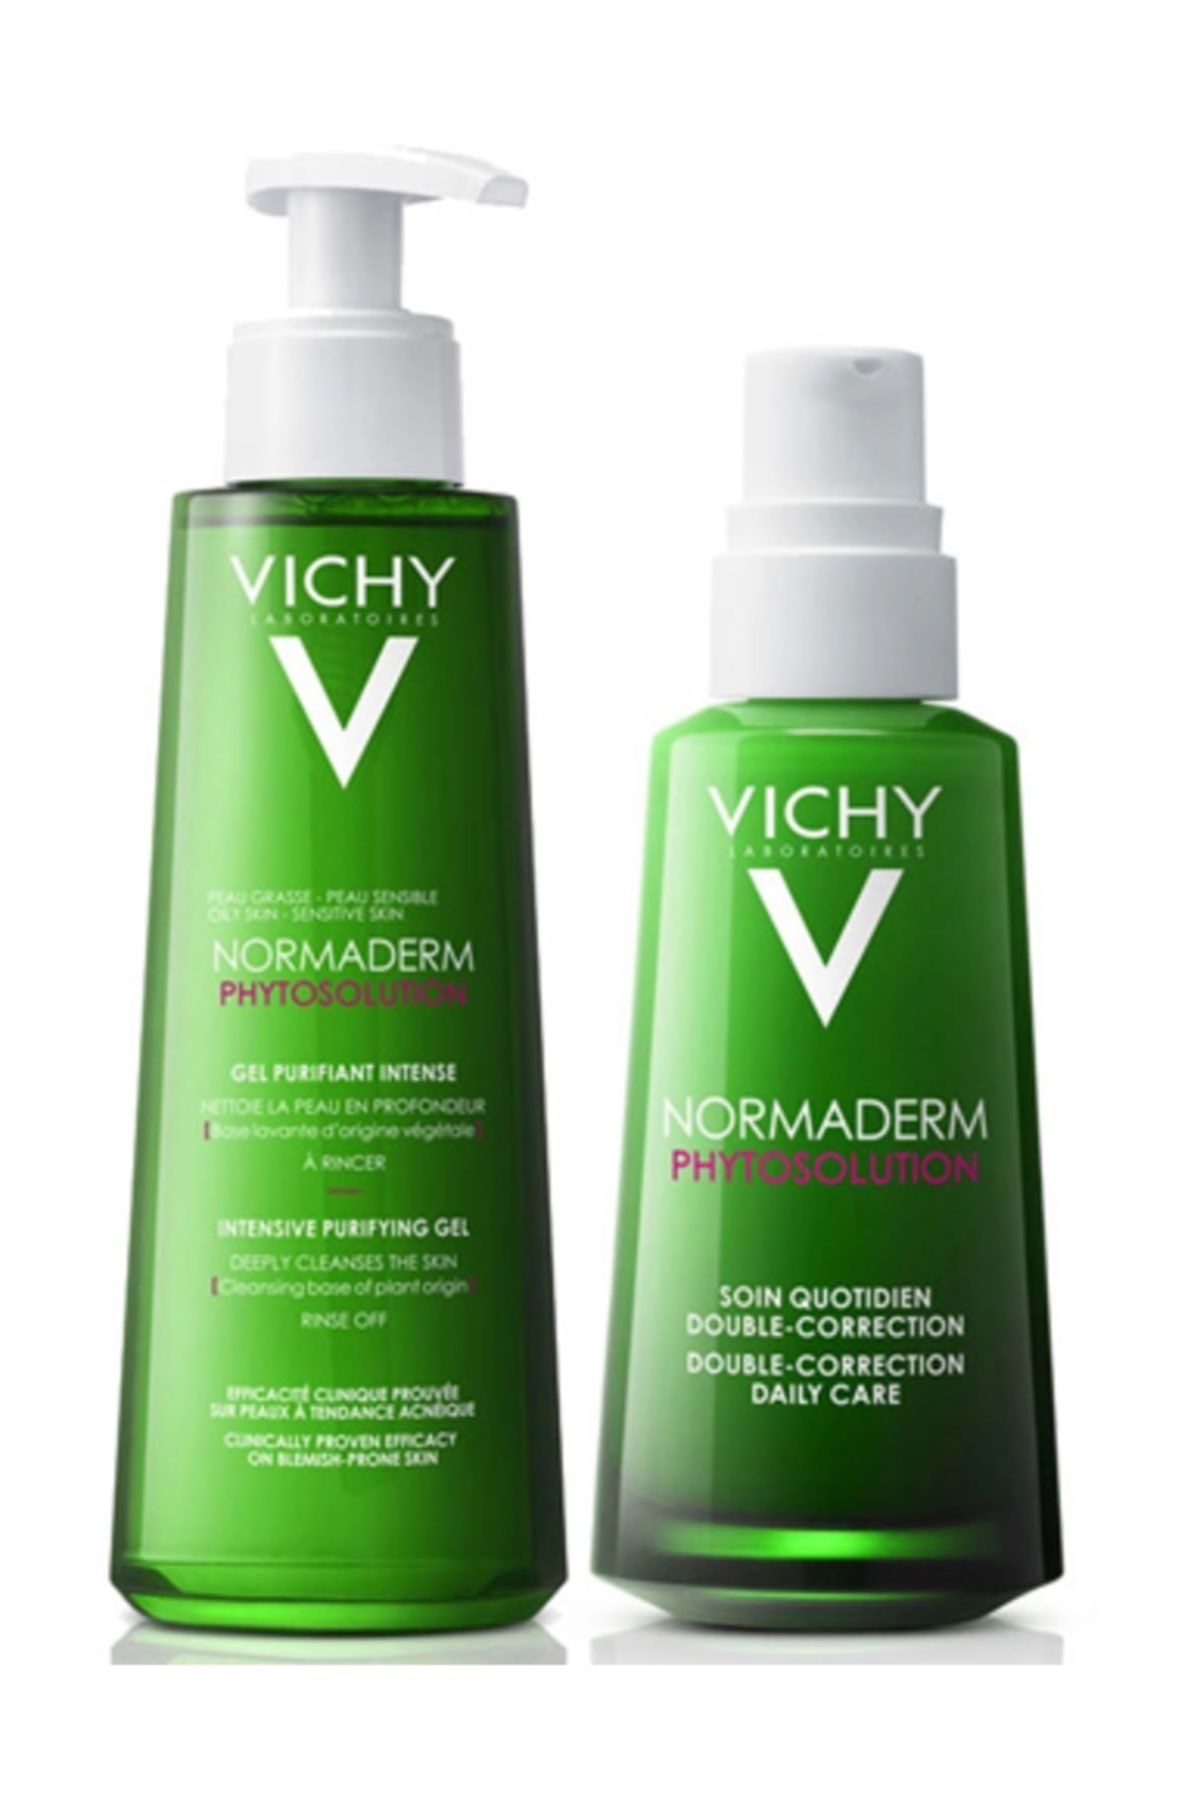 Normaderm gel purifiant. Виши Нормадерм виши. Vichy Нормадерм гель. Виши Нормадерм фитосолюшн крем. Vichy Normaderm phytosolution 50 мл.